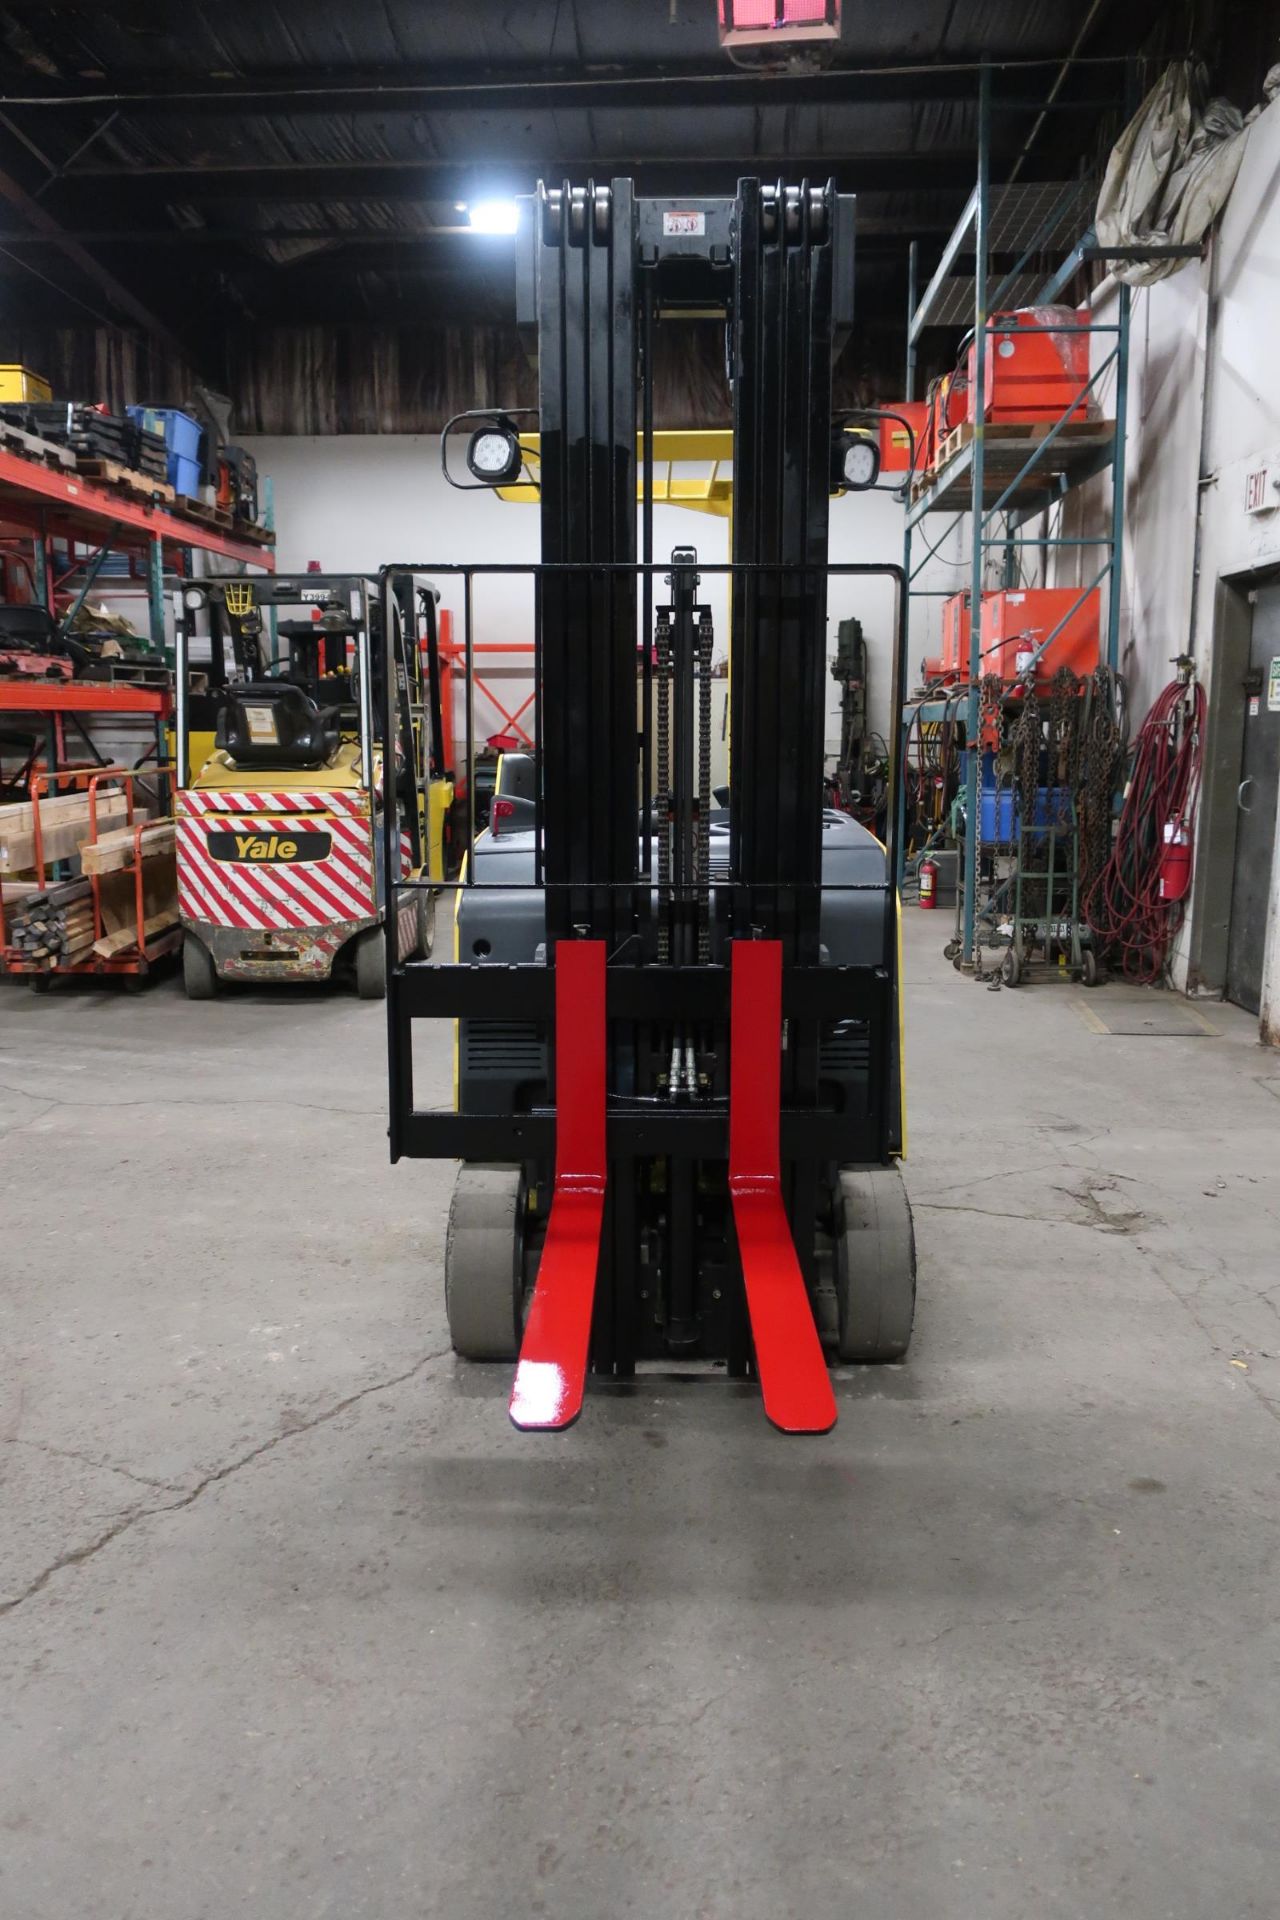 FREE CUSTOMS - 2014 Hyster Reach Truck Pallet Lifter 3200lbs capacity unit 4-stage ELECTRIC with - Image 2 of 2